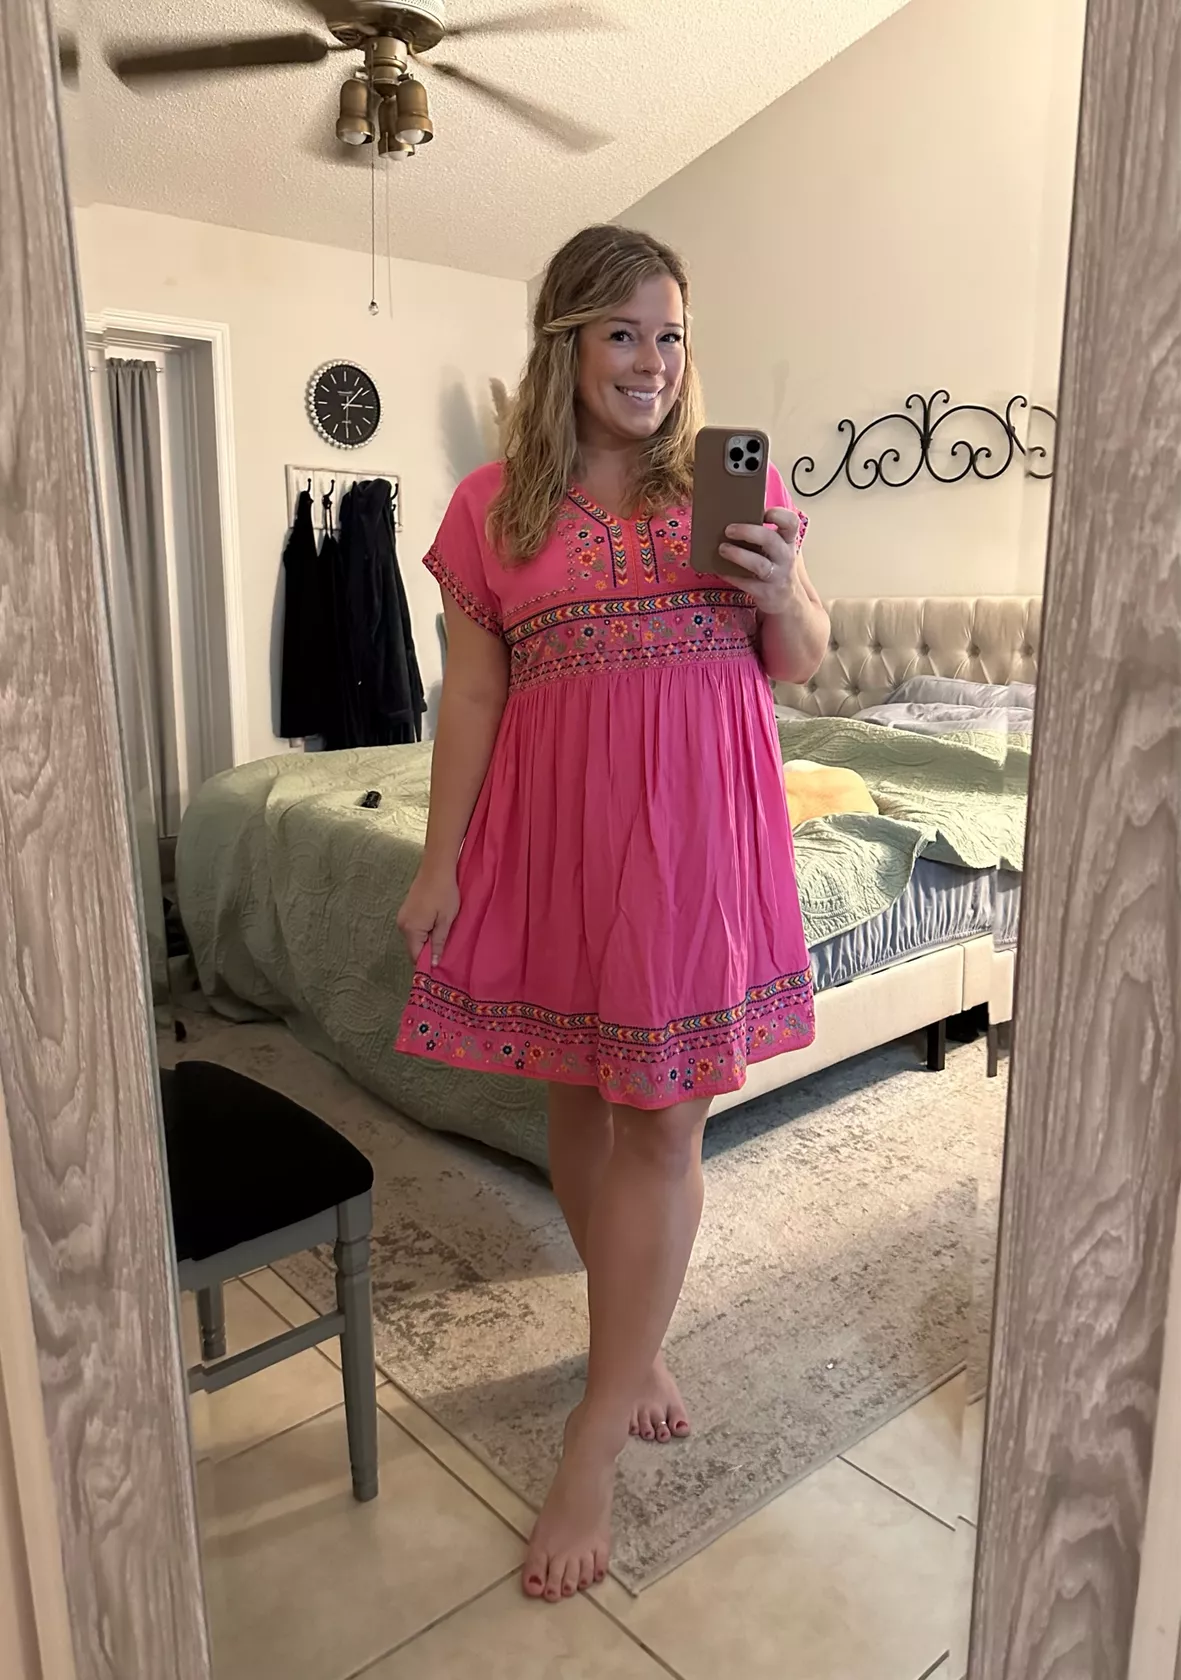 I'm a midsize fashion fan & there's a New Look dress perfect for